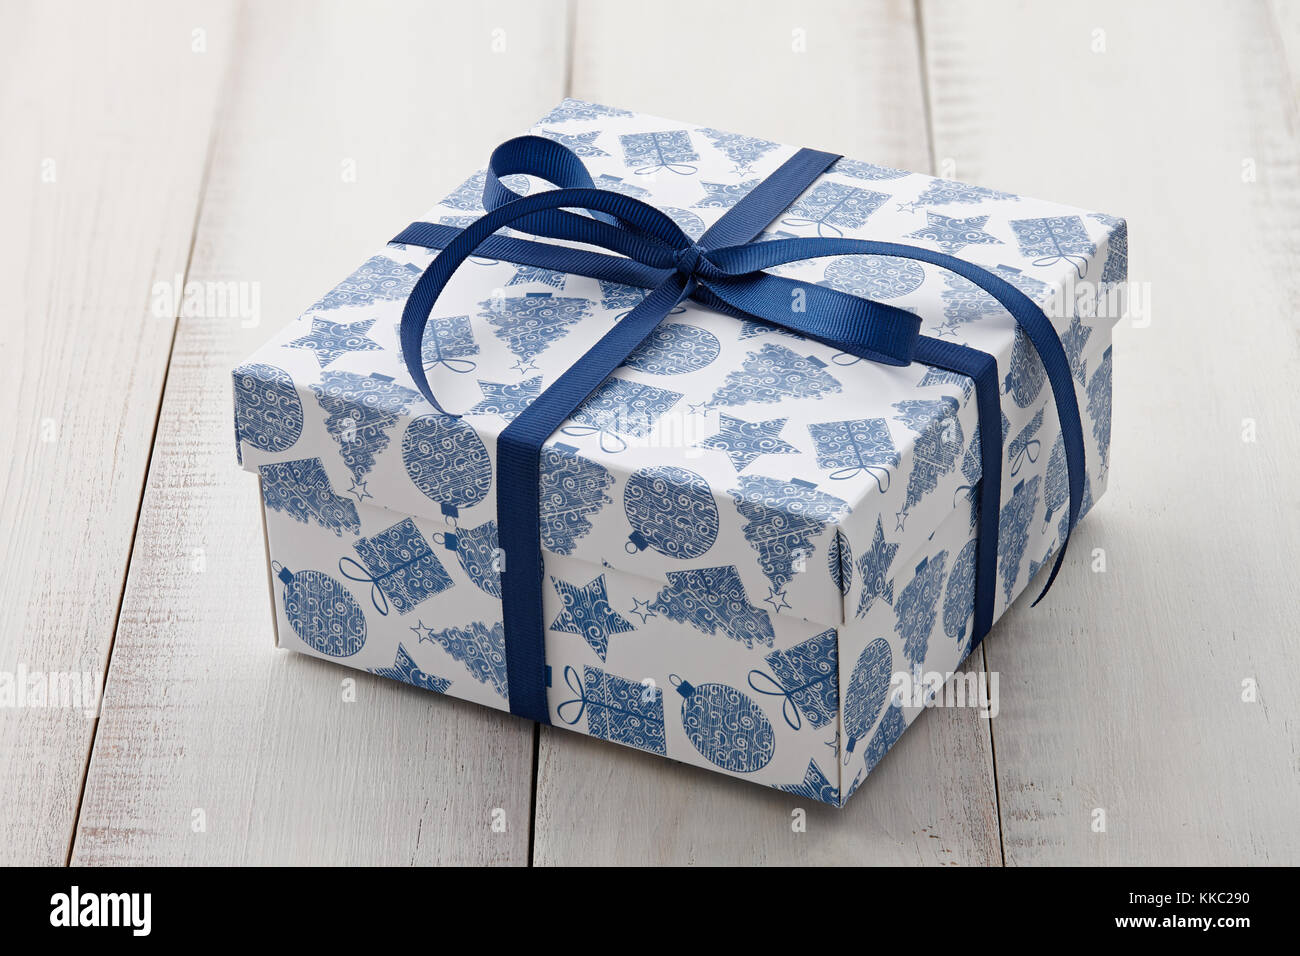 Blue and white Christmas gift or present box close up Stock Photo